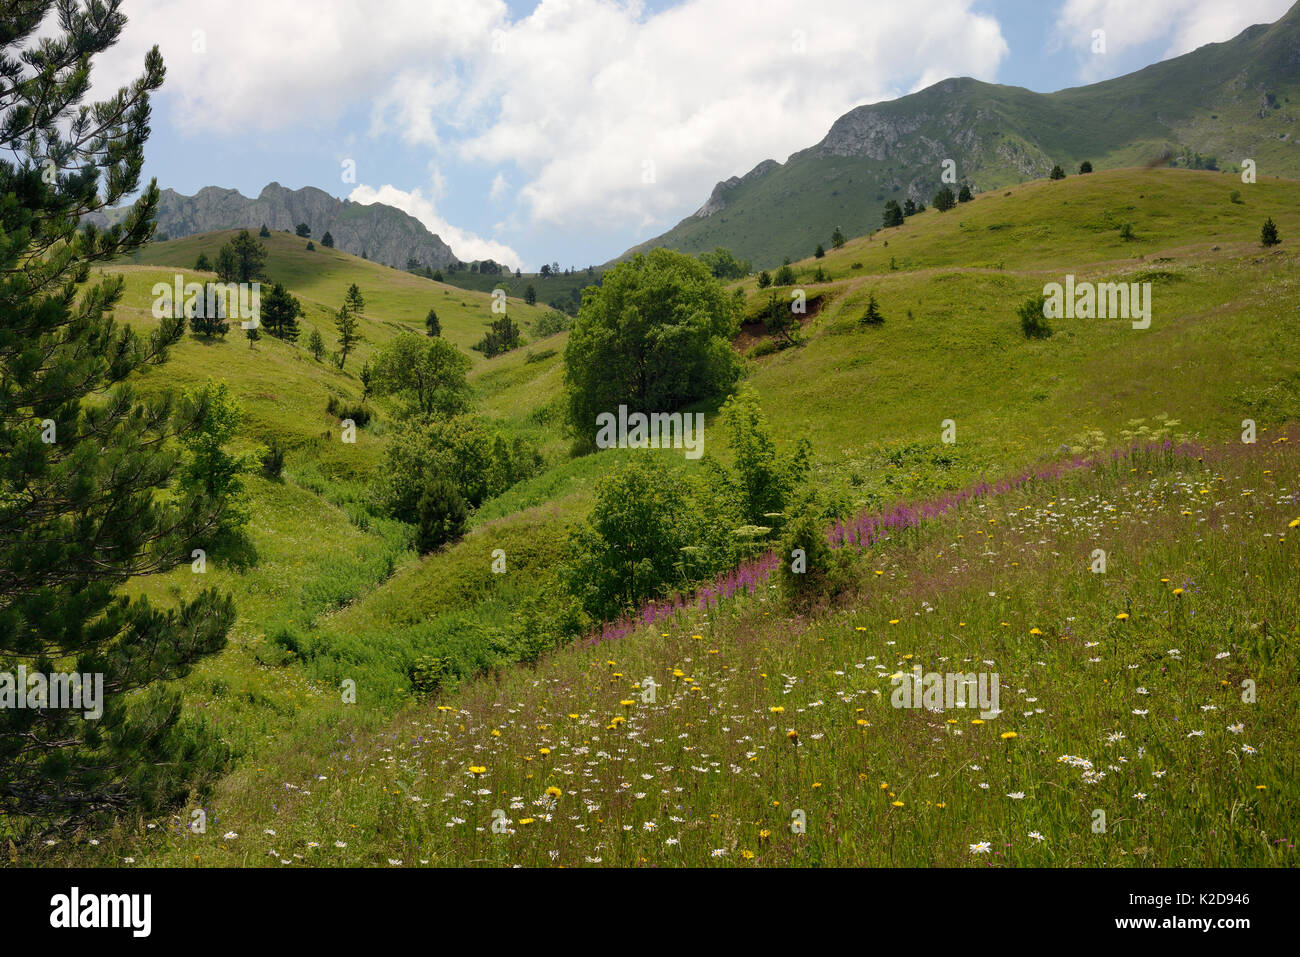 Alpine meadows in Sutjeska National Park with a profusion of wild flowers, including Spotted hawkweed (Hypochoeris maculata), Marguerites (Leucanthemum vulgare) and Rosebay willowherb (Epilobium / Chamerion angustifolium) with a stream flowing down from the Zelengora mountain range, background, Bosnia and Herzegovina, July. Stock Photo